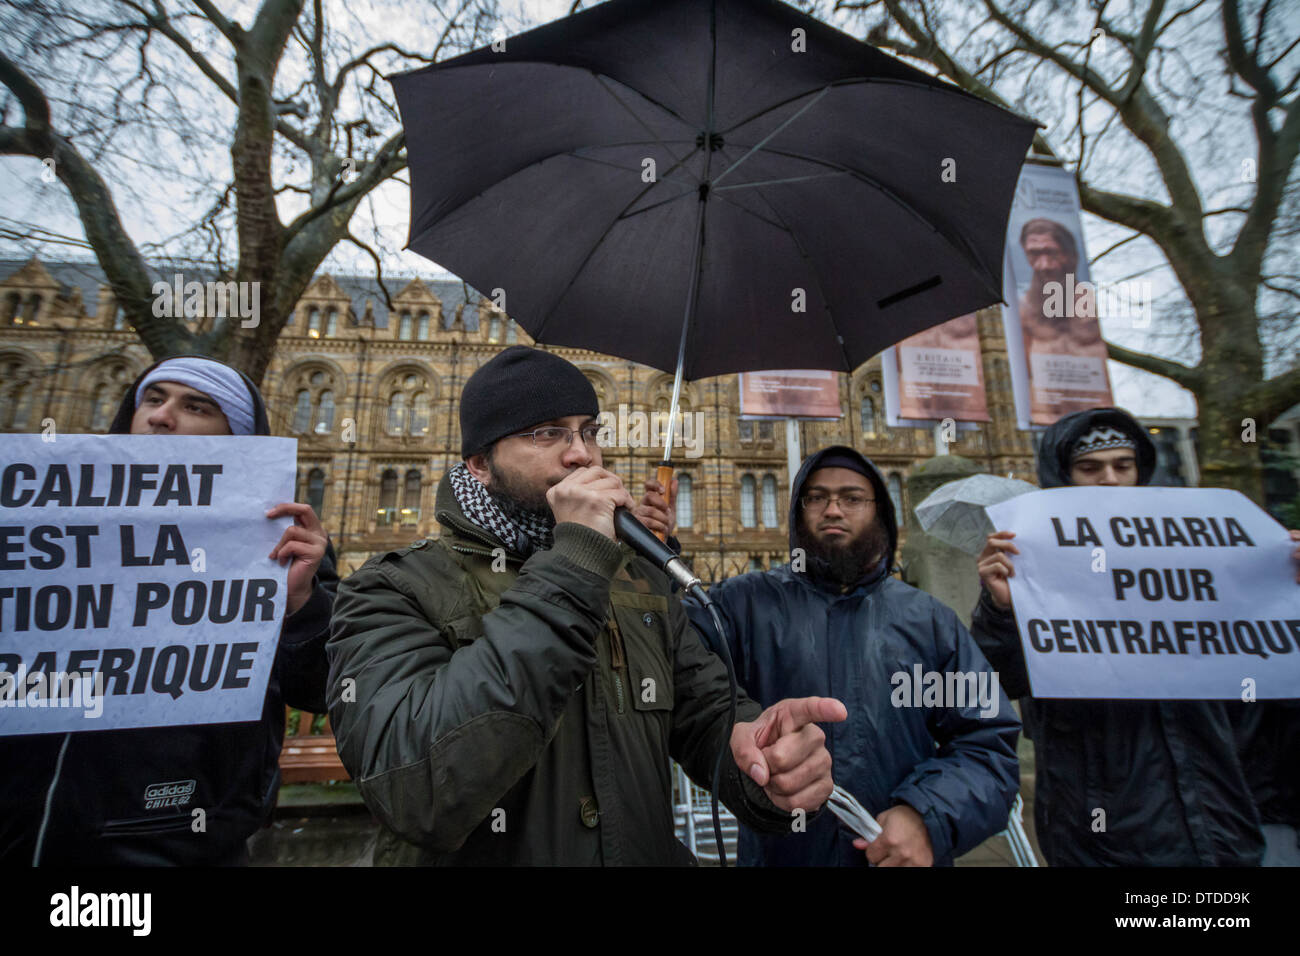 Radical Islamists protest outside French Consulate in London Stock Photo